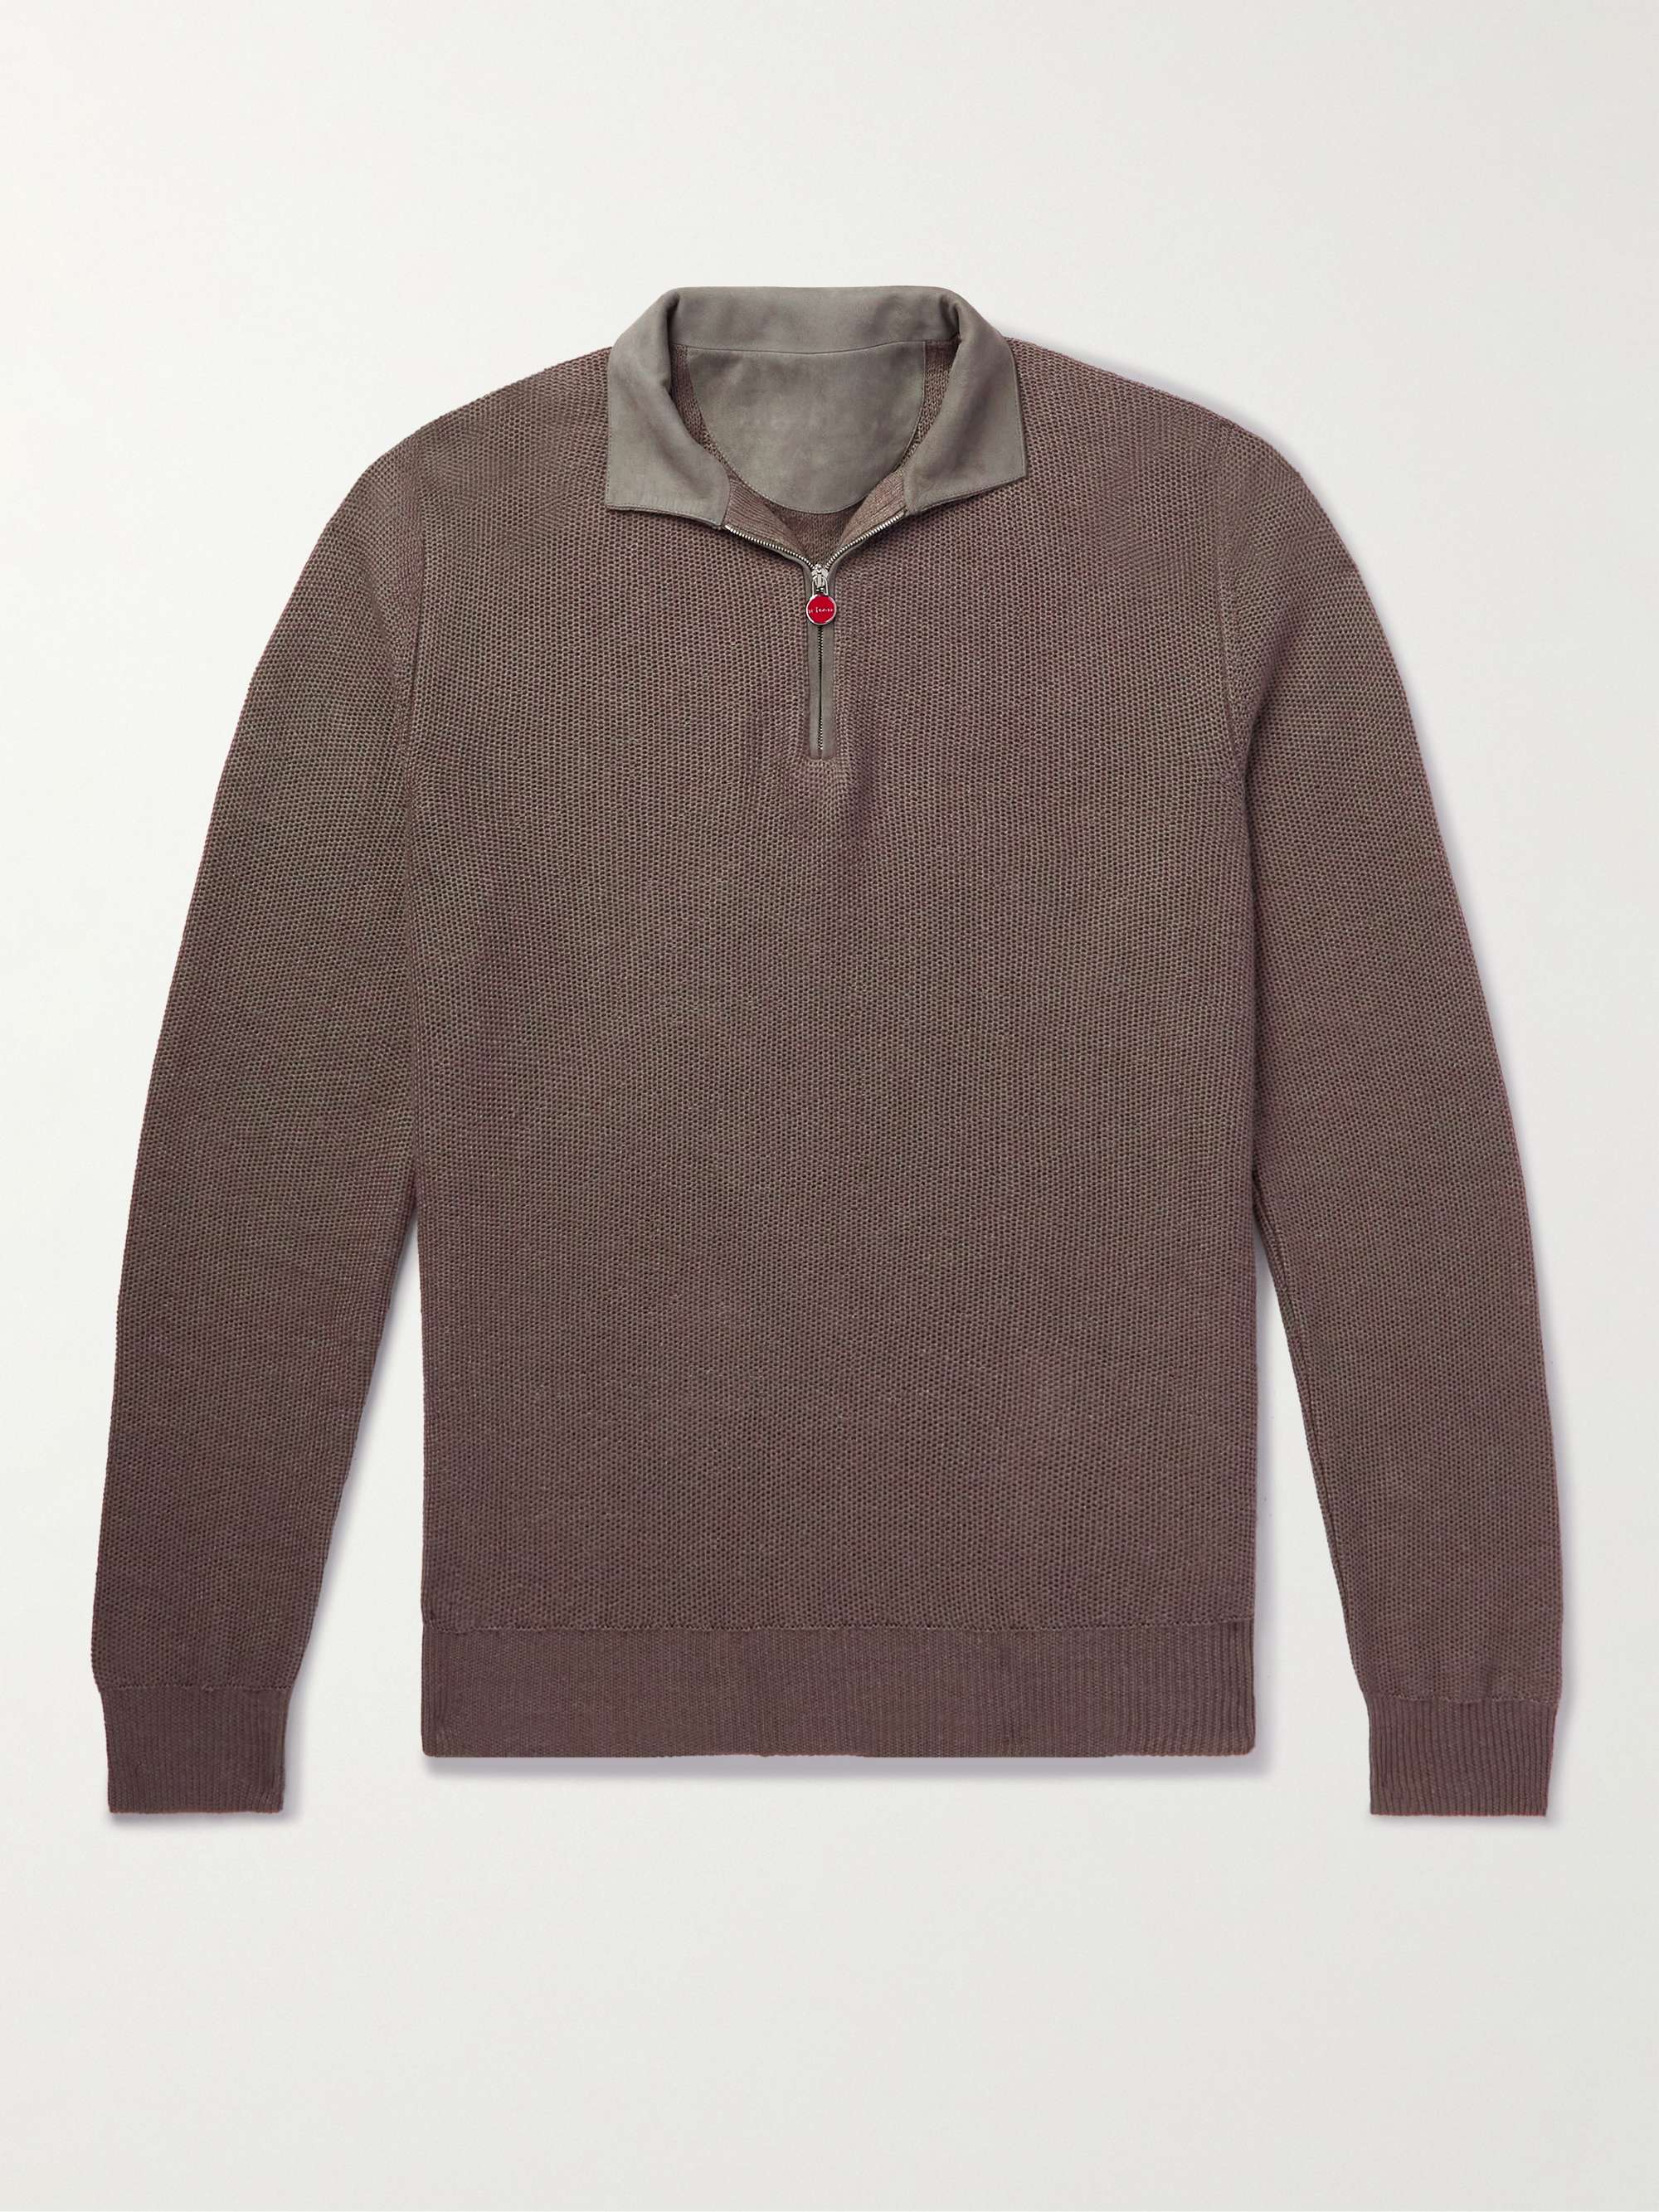 KITON Suede-Trimmed Honeycomb-Knit Linen and Cashmere-Blend Half-Zip Sweater